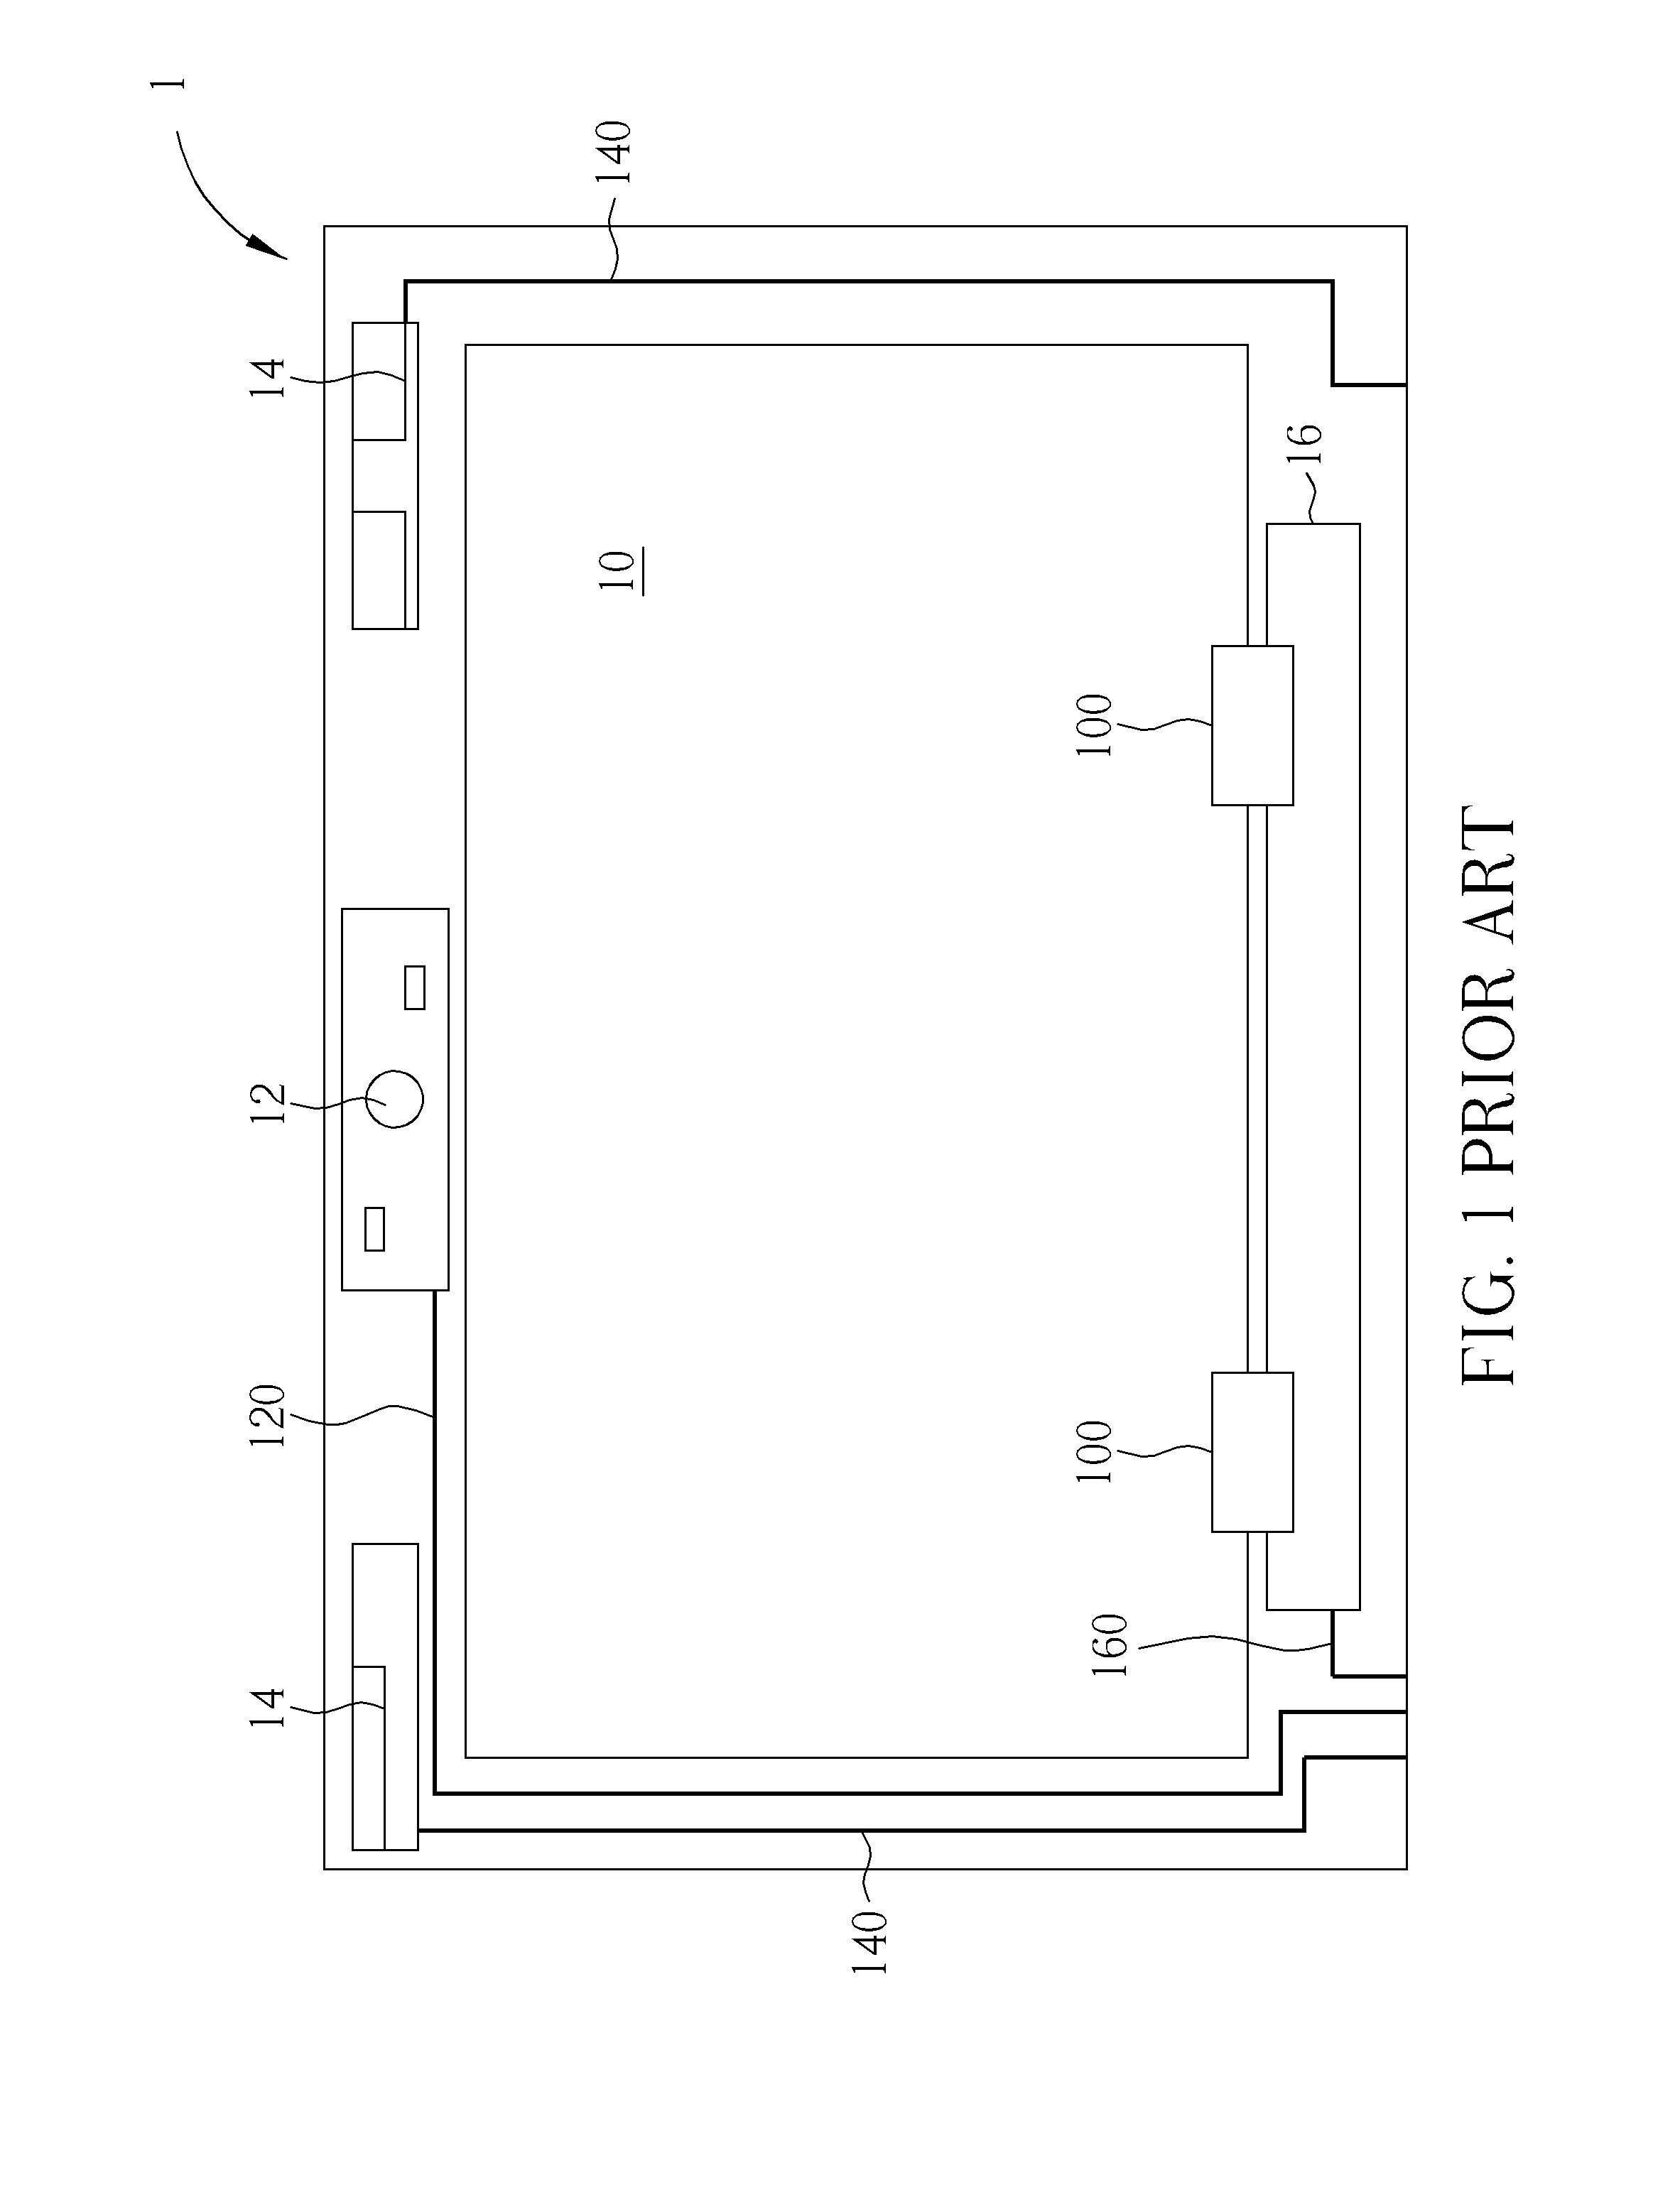 Integrated circuit board and display system